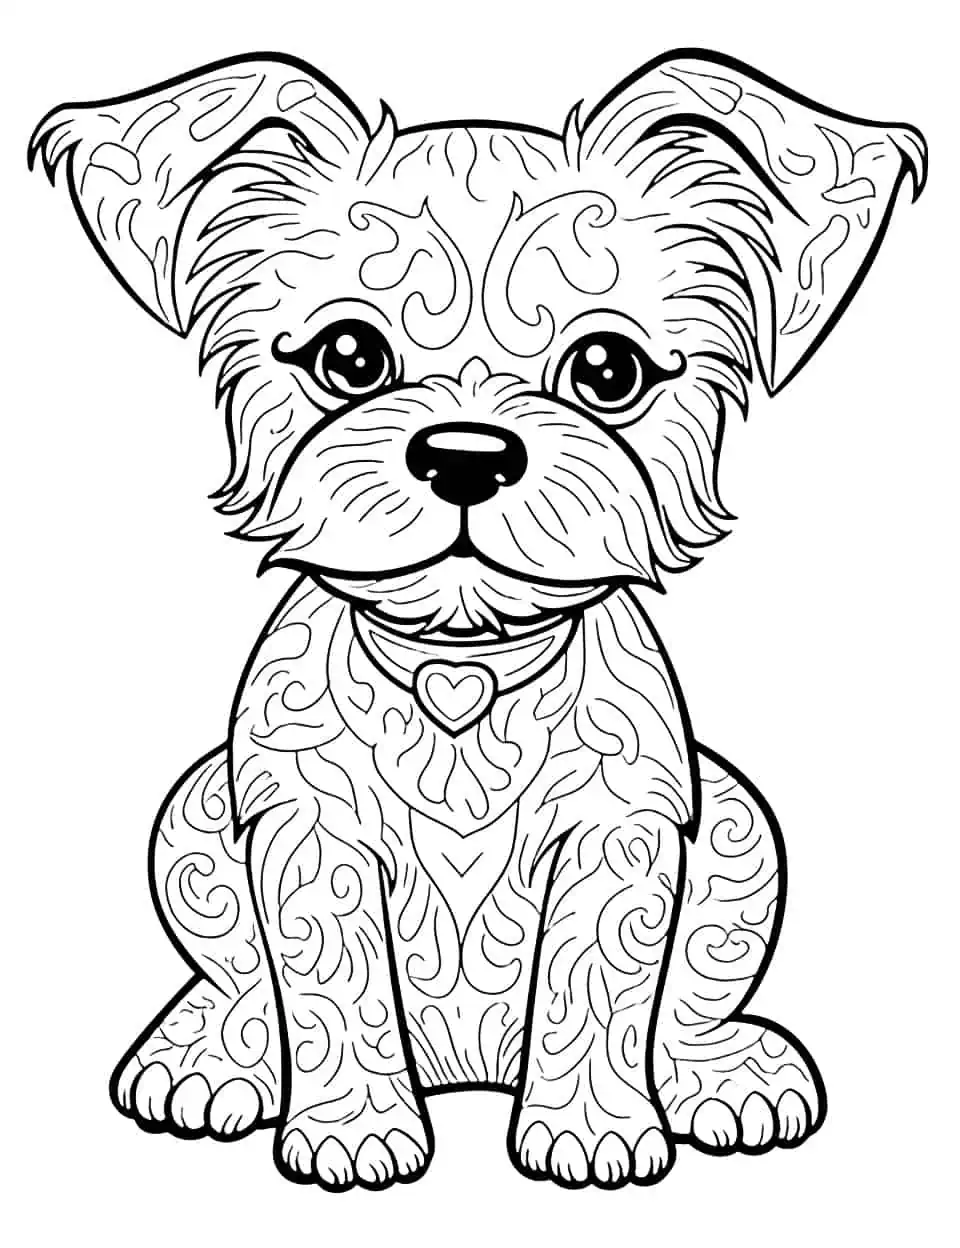 Mandala and Yorkie Mix Dog Coloring Page - A cute Yorkie surrounded by a complex mandala design.